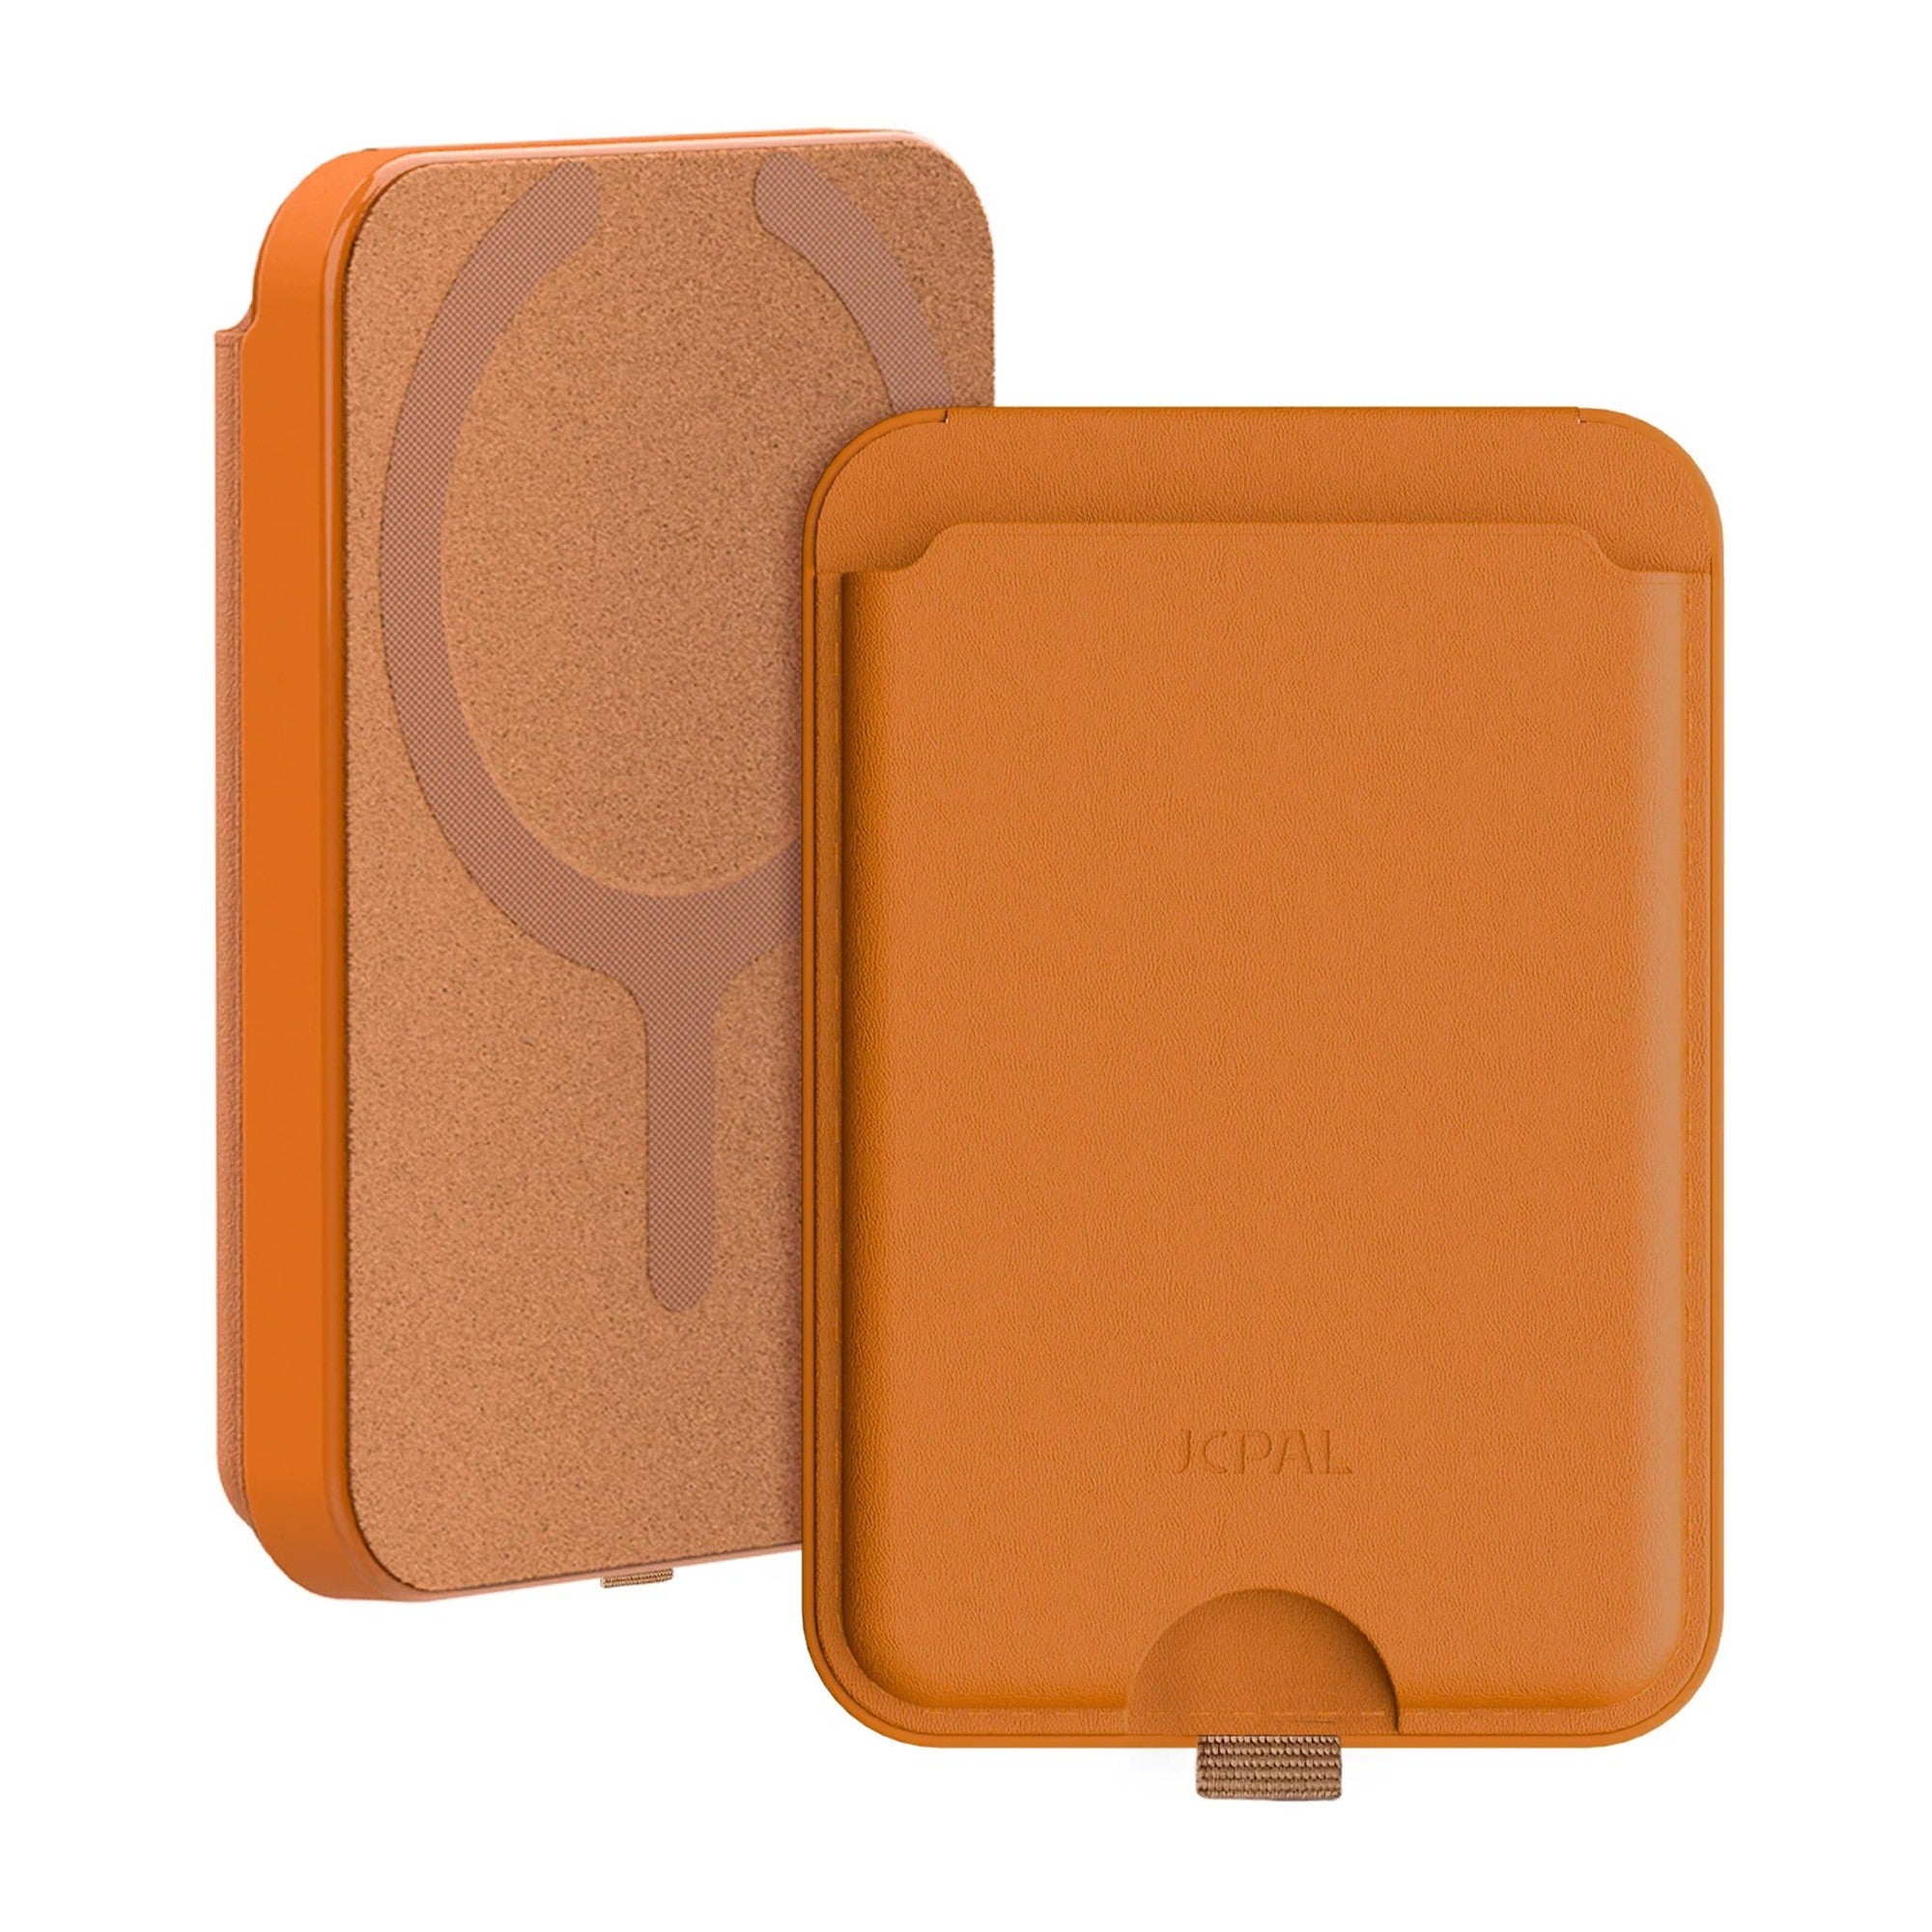 Universal JCPal Cove MagSafe Wallet Stand - Tan - 15-11950